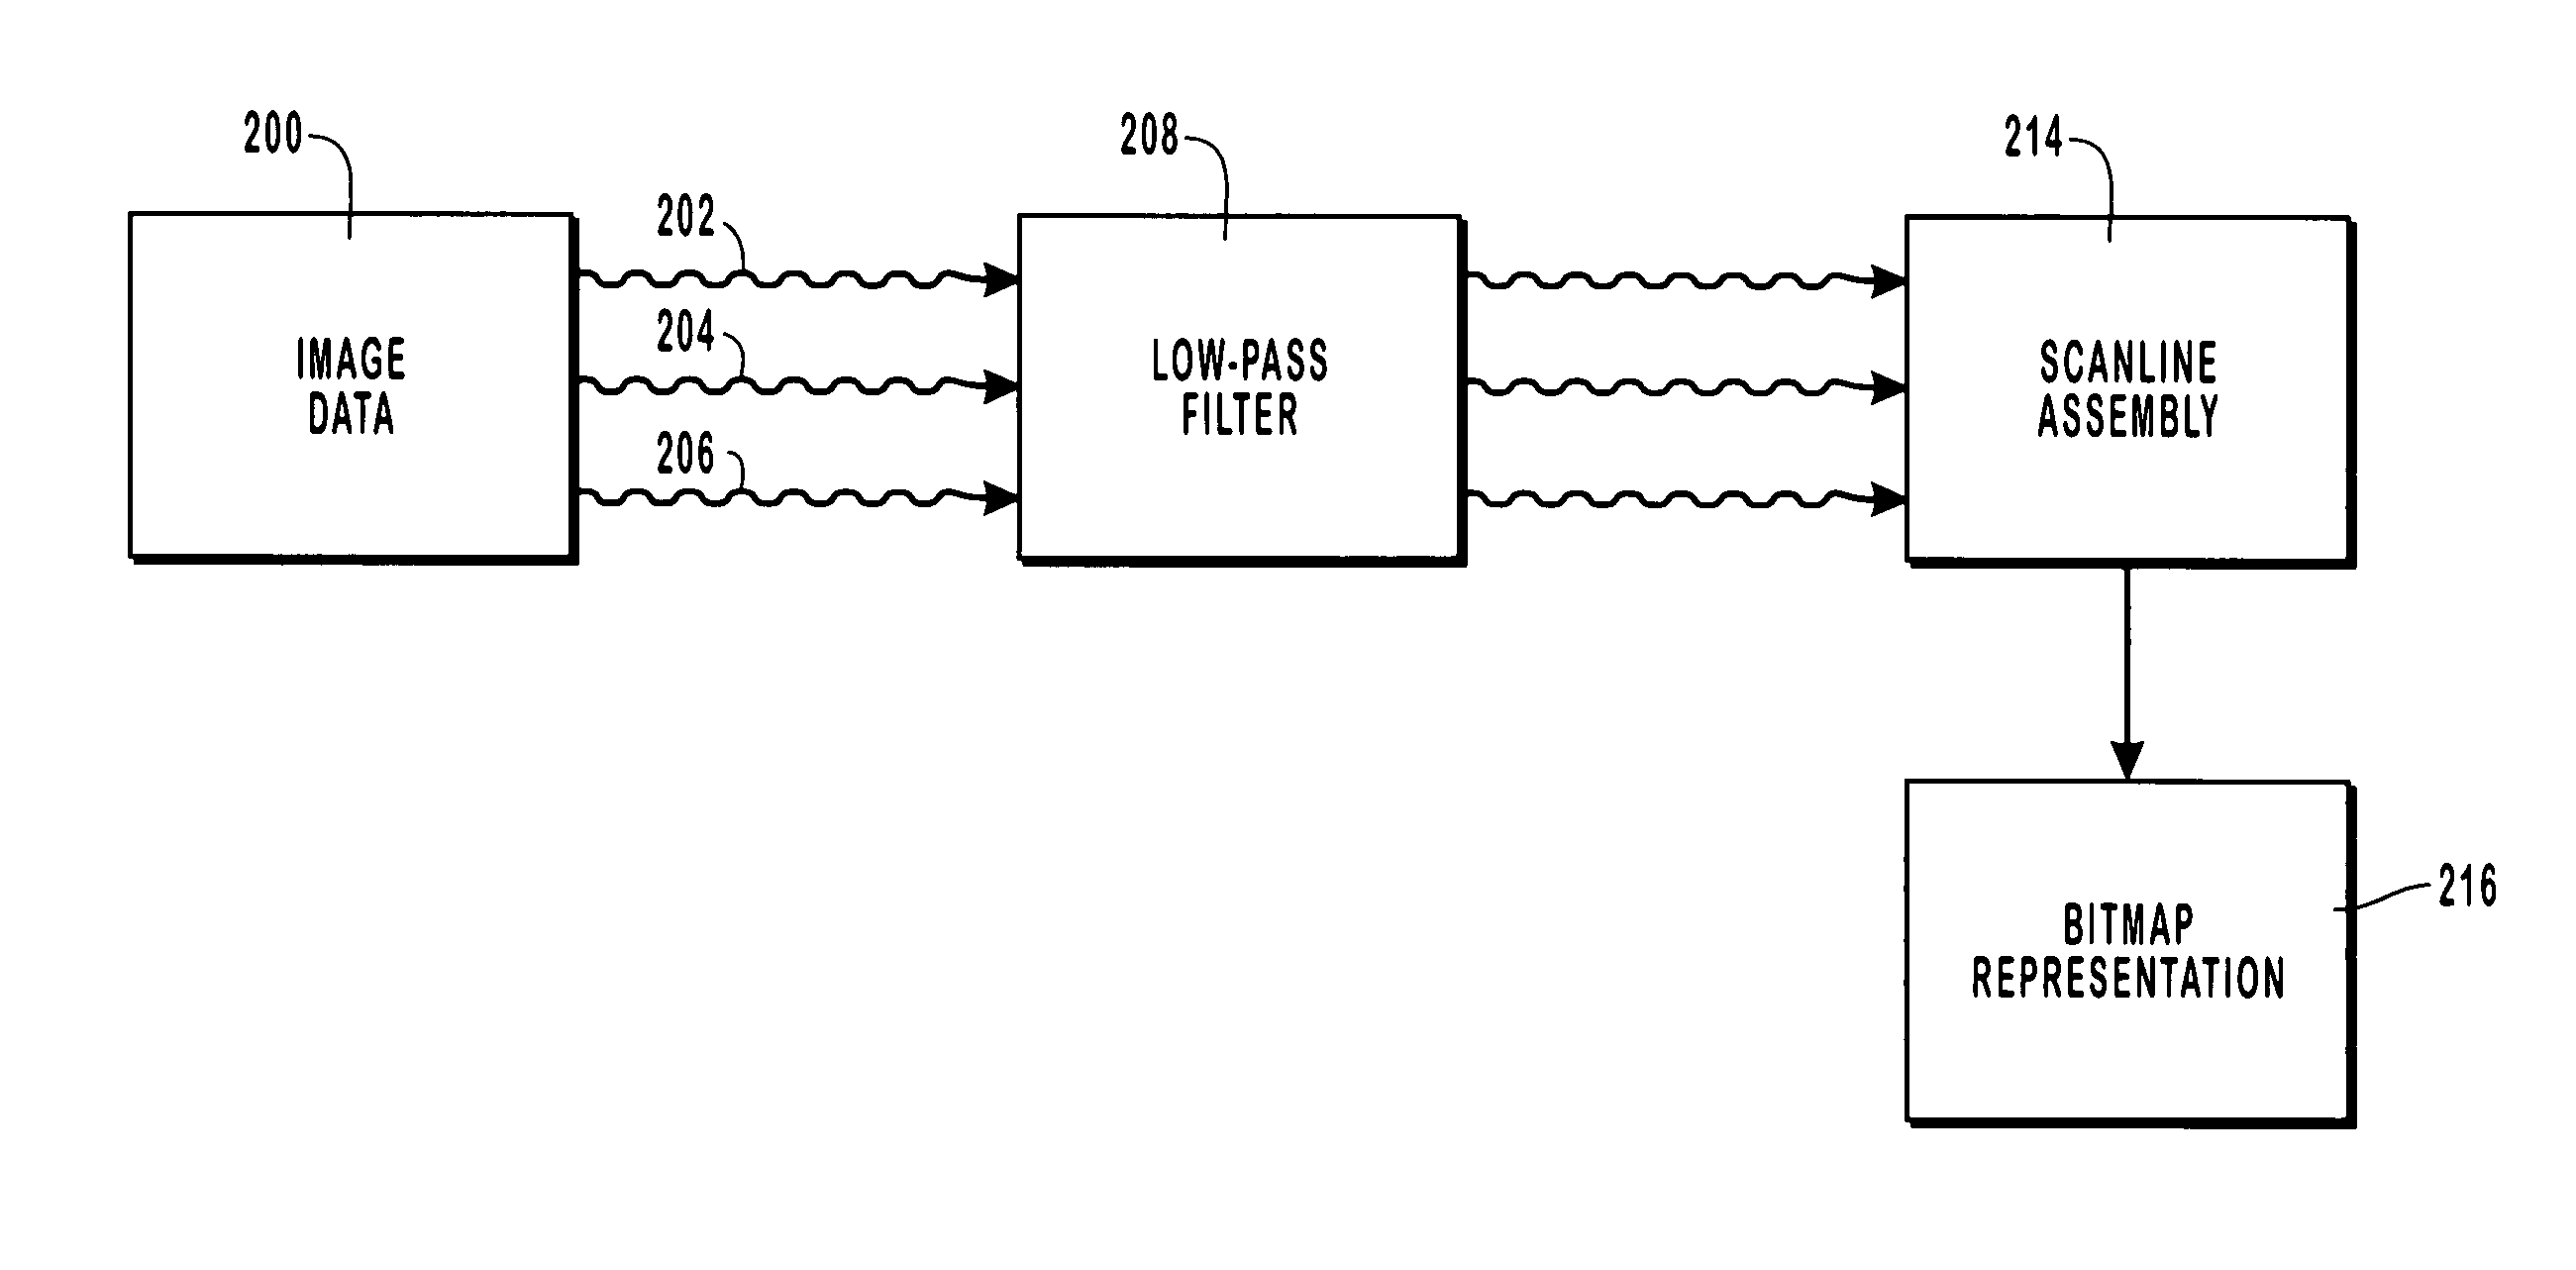 Filtering image data to obtain samples mapped to pixel sub-components of a display device